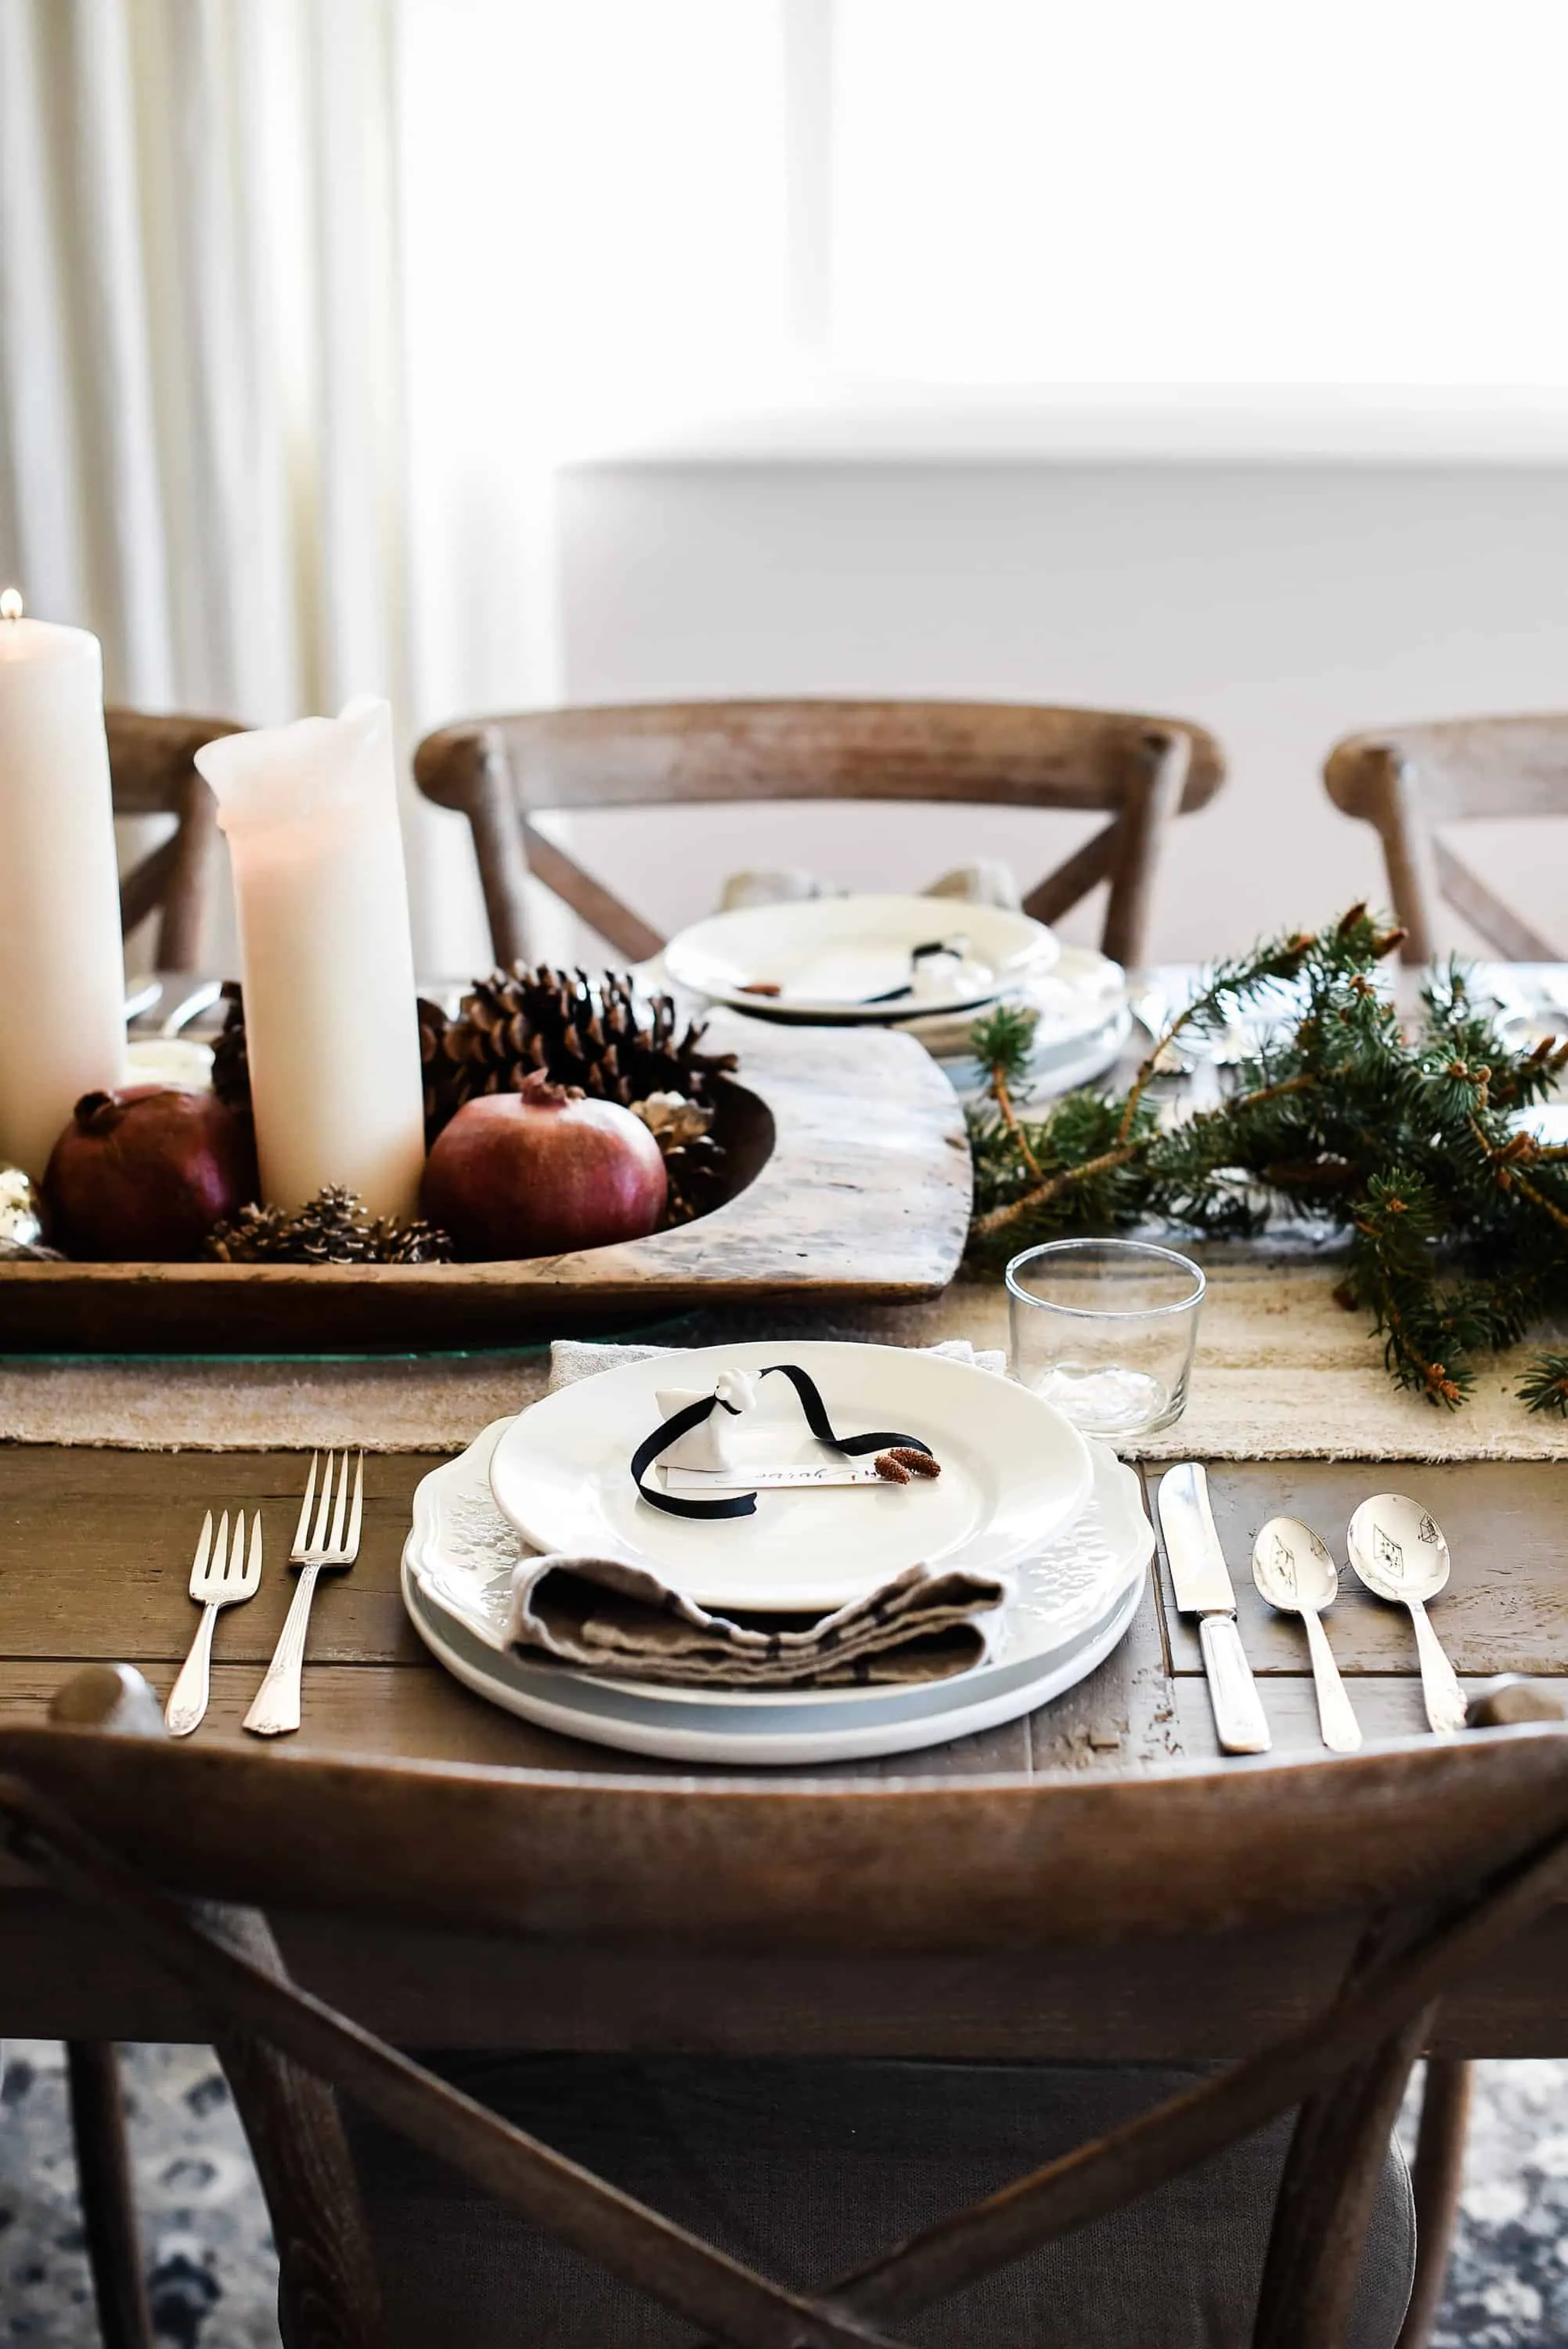 Create your own farmhouse Christmas with simple table ideas for decorating your dining room this holiday season! 